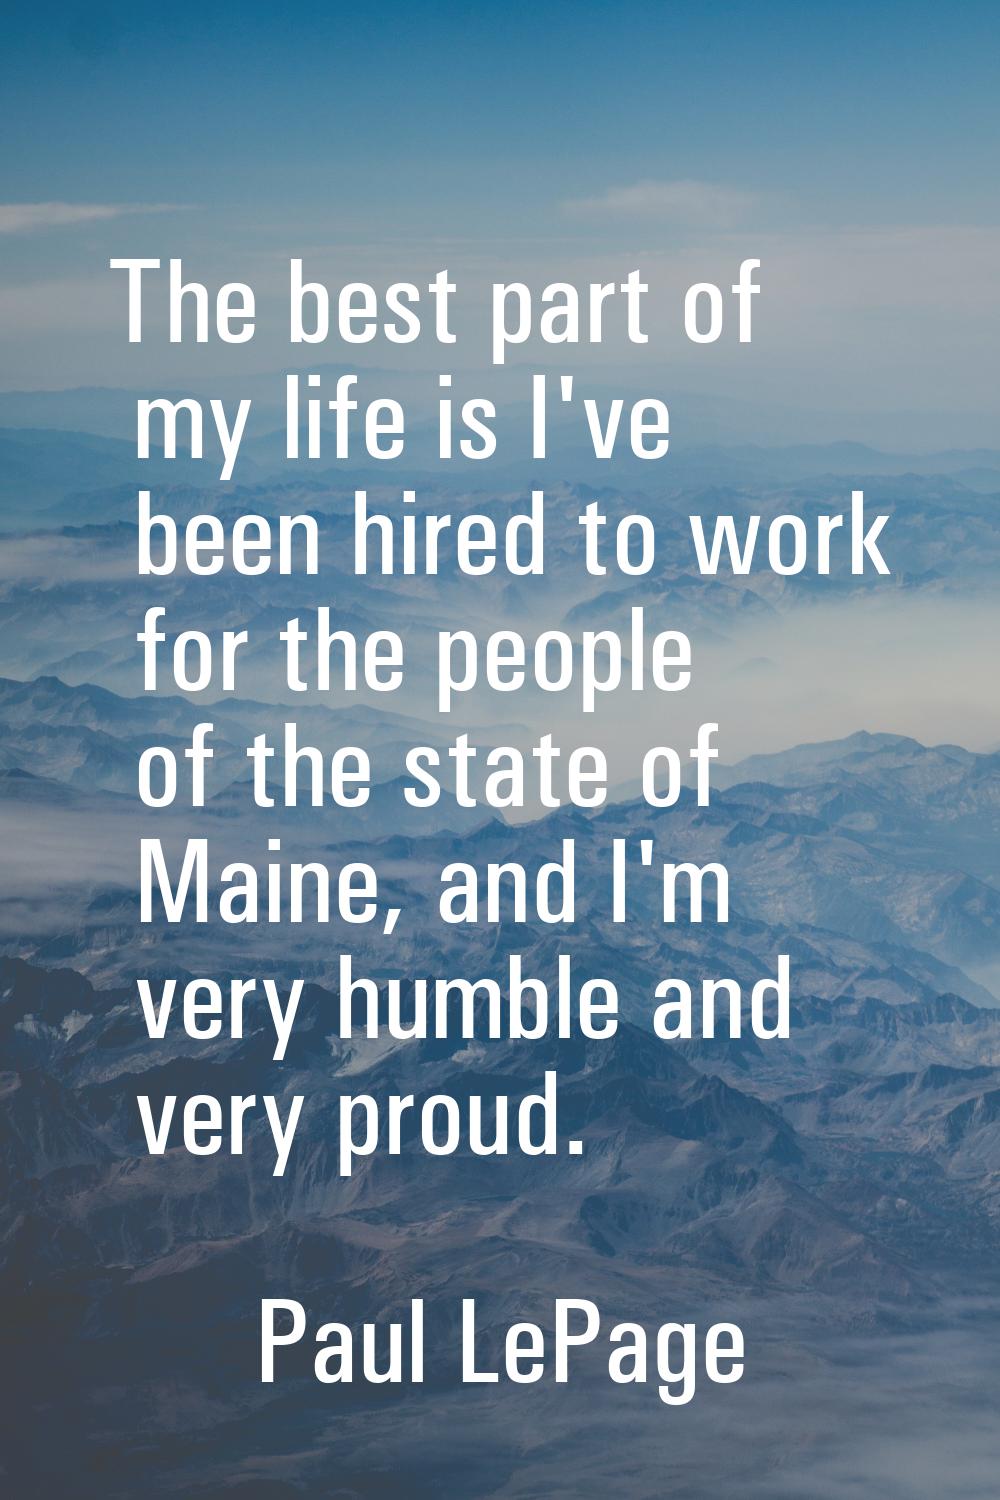 The best part of my life is I've been hired to work for the people of the state of Maine, and I'm v